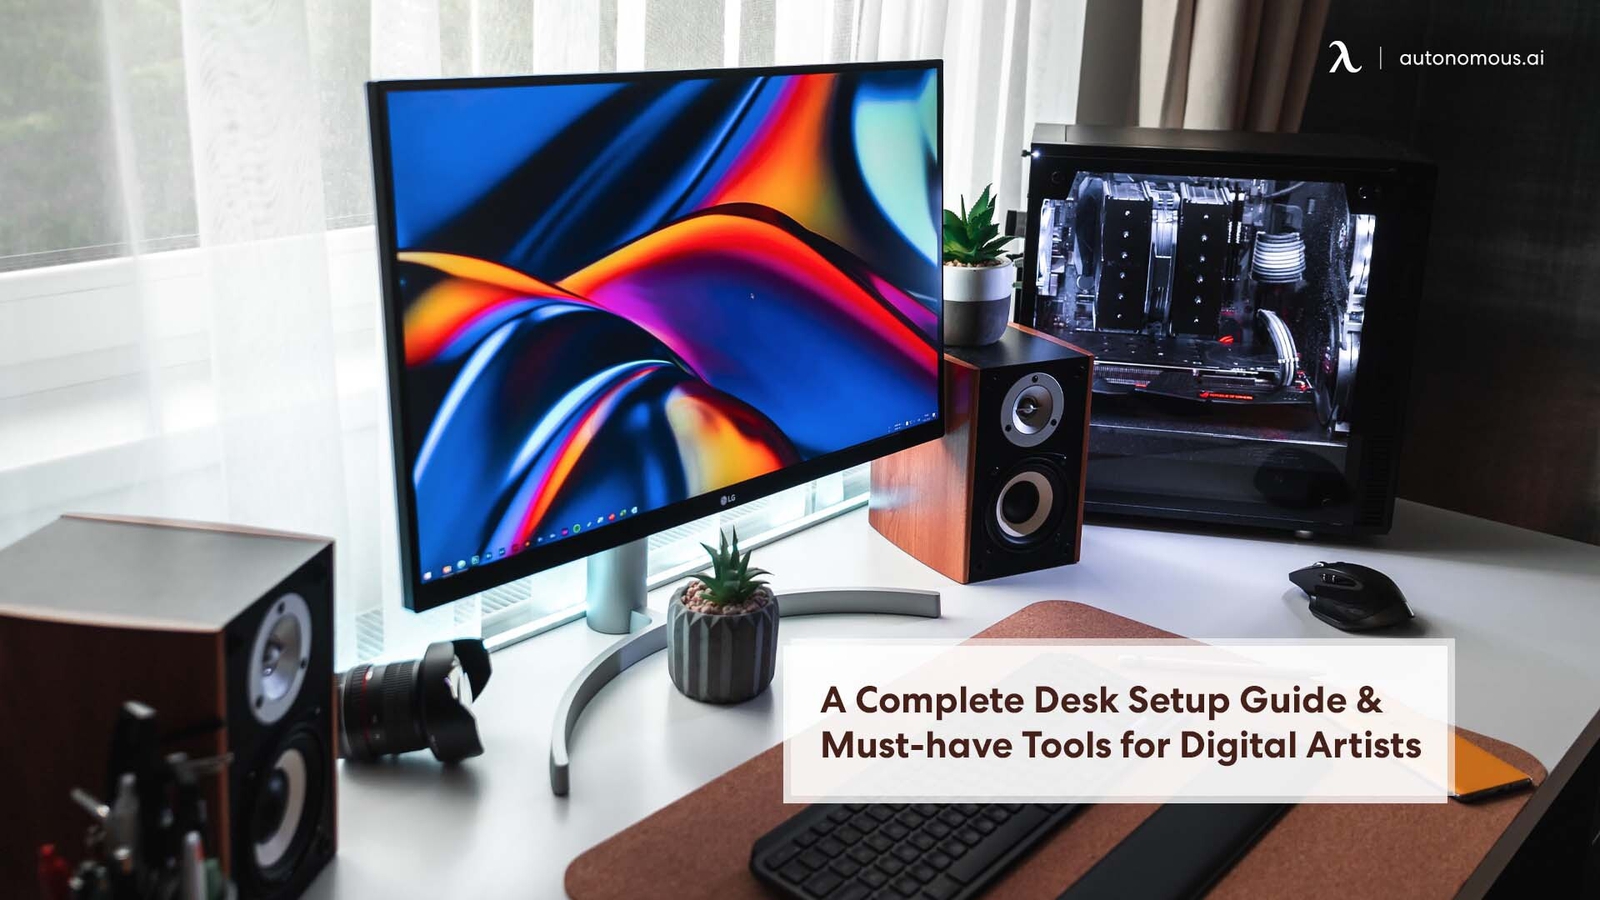 A Complete Desk Setup Guide And Must-have Tools for Digital Artists